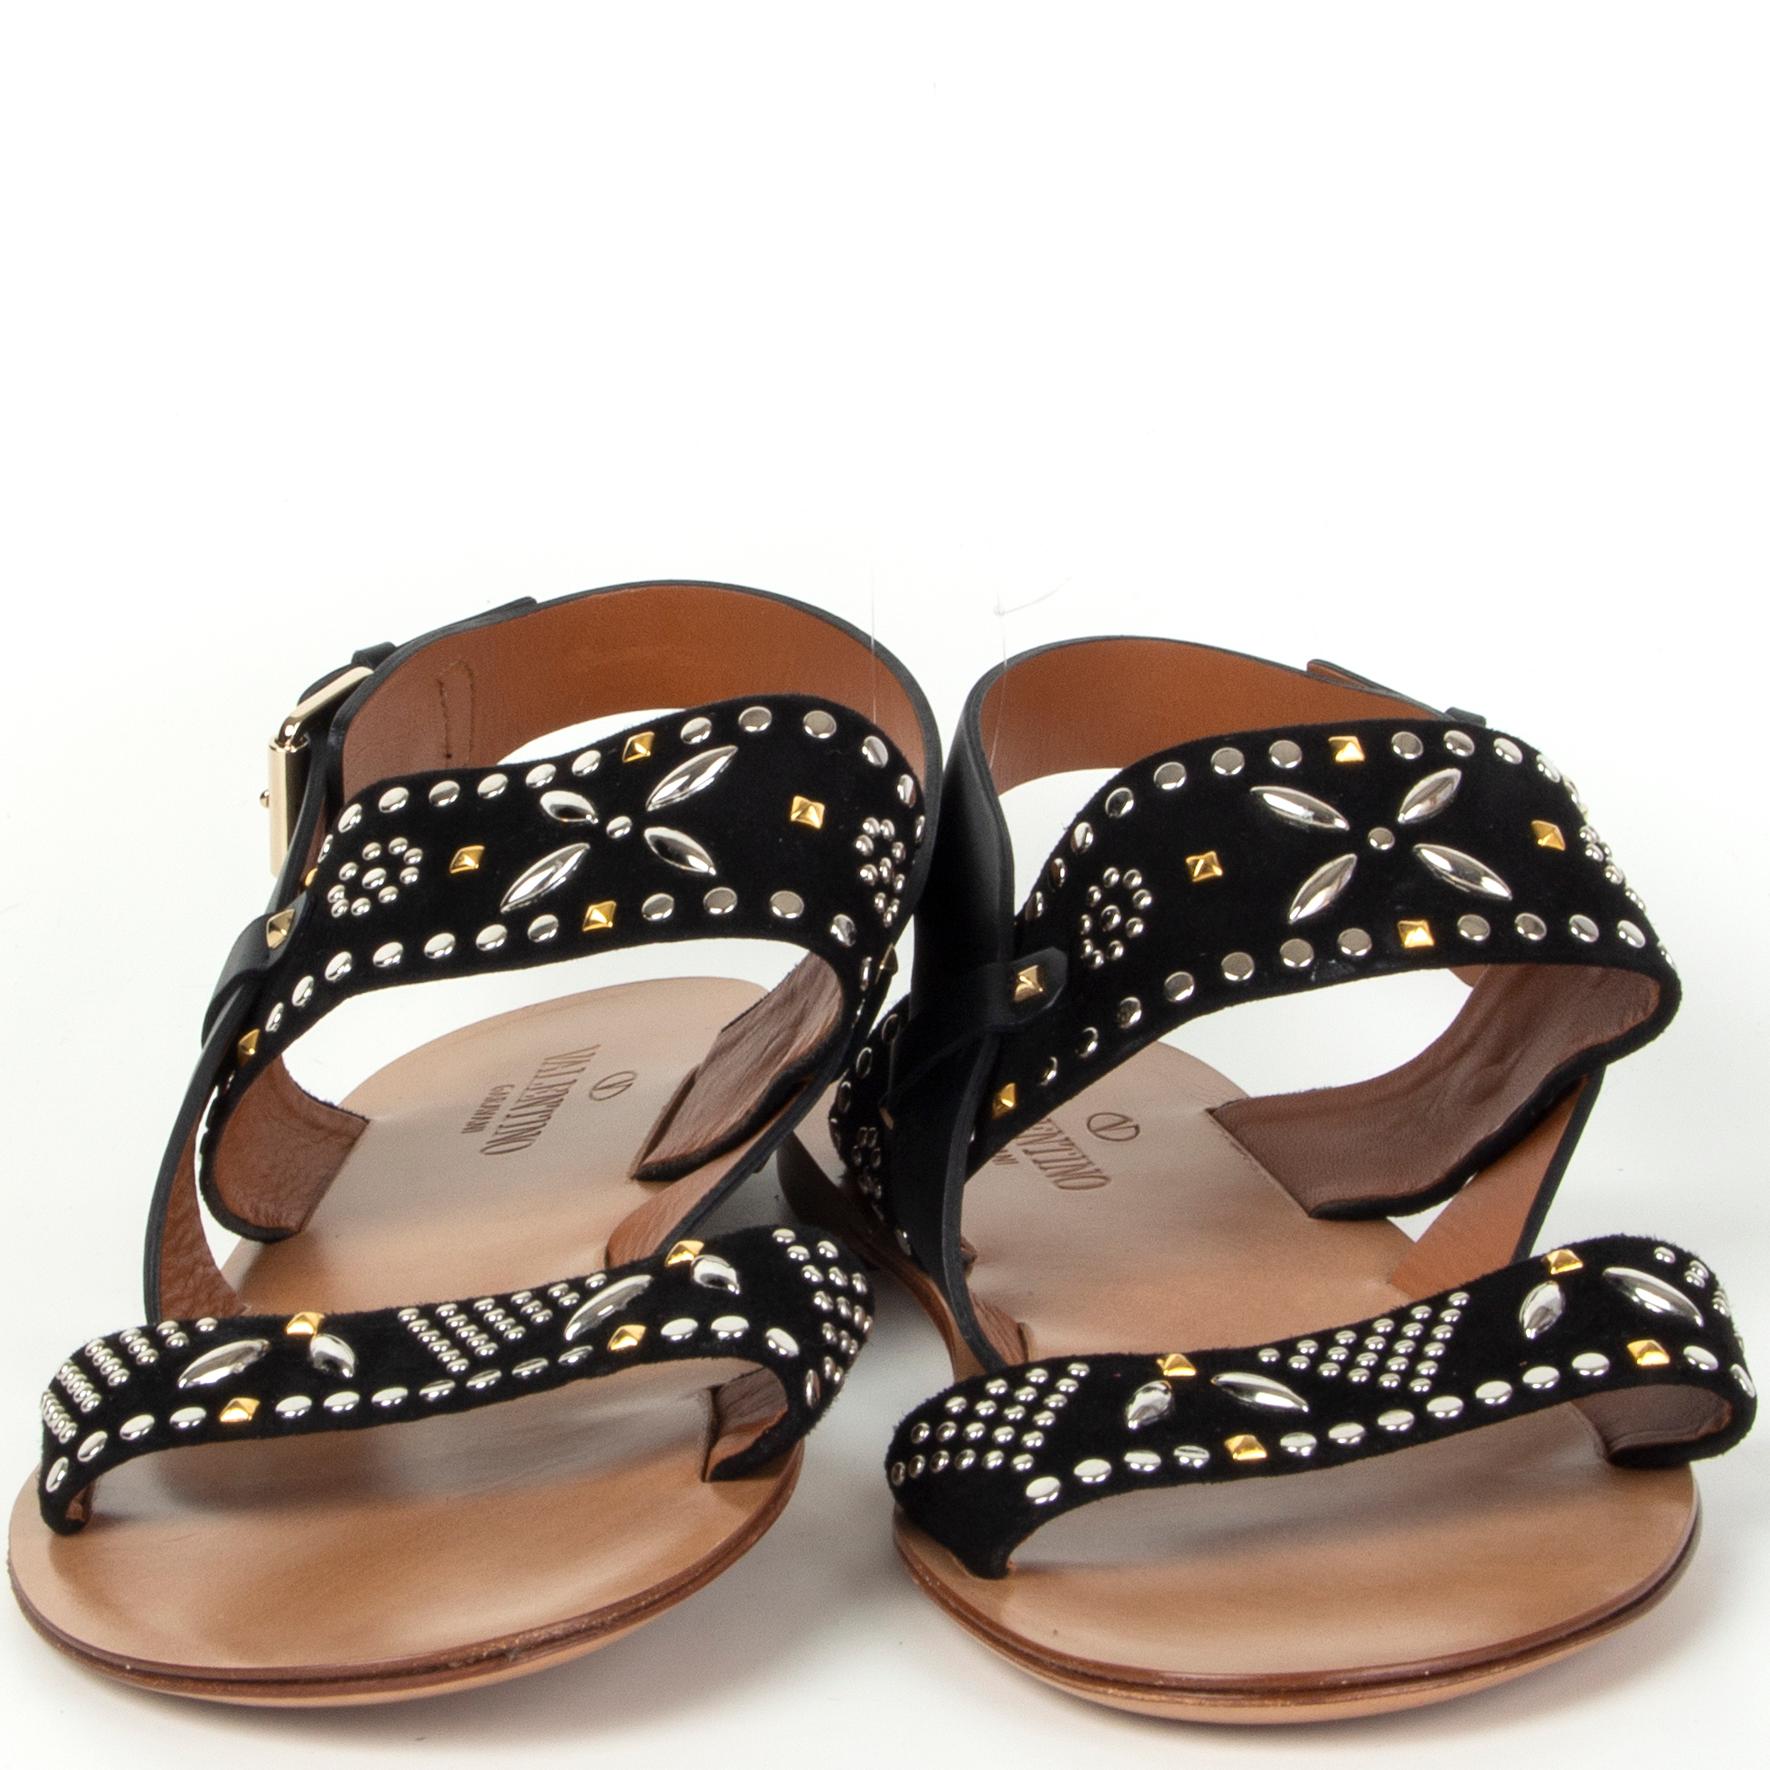 100% authentic Valentino studded flat sandals in black suede and leather. Bradn new. Come with dust bag. 

Measurements
Imprinted Size	40
Shoe Size	40
Inside Sole	26cm (10.1in)
Width	7.5cm (2.9in)
Hardware	Silver & Gold-Tone

All our listings